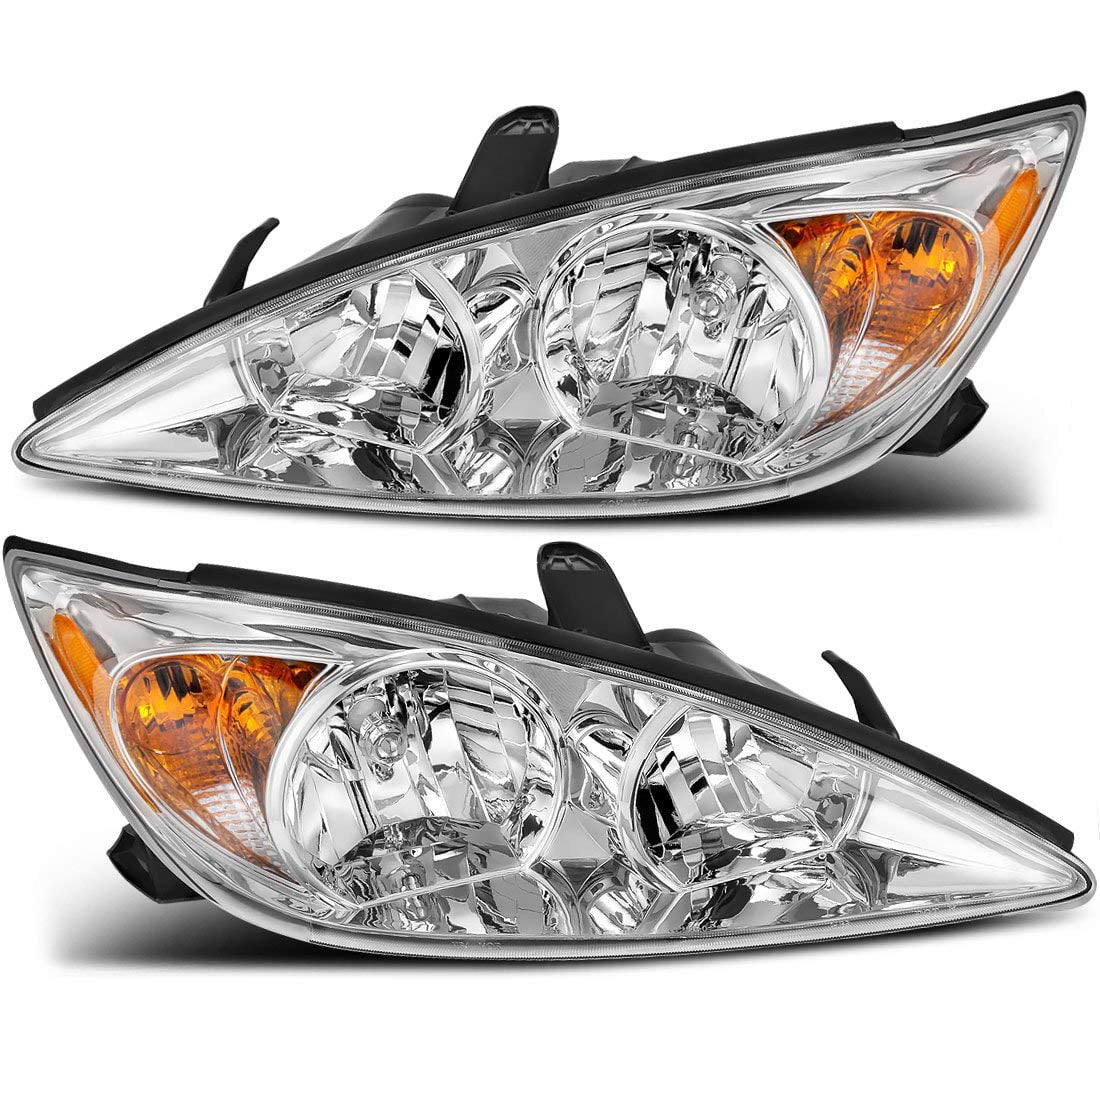 OEDRO Compatible with 2002-2004 Toyota Camry Headlight Chrome Housing Amber Reflector Clear Lens 